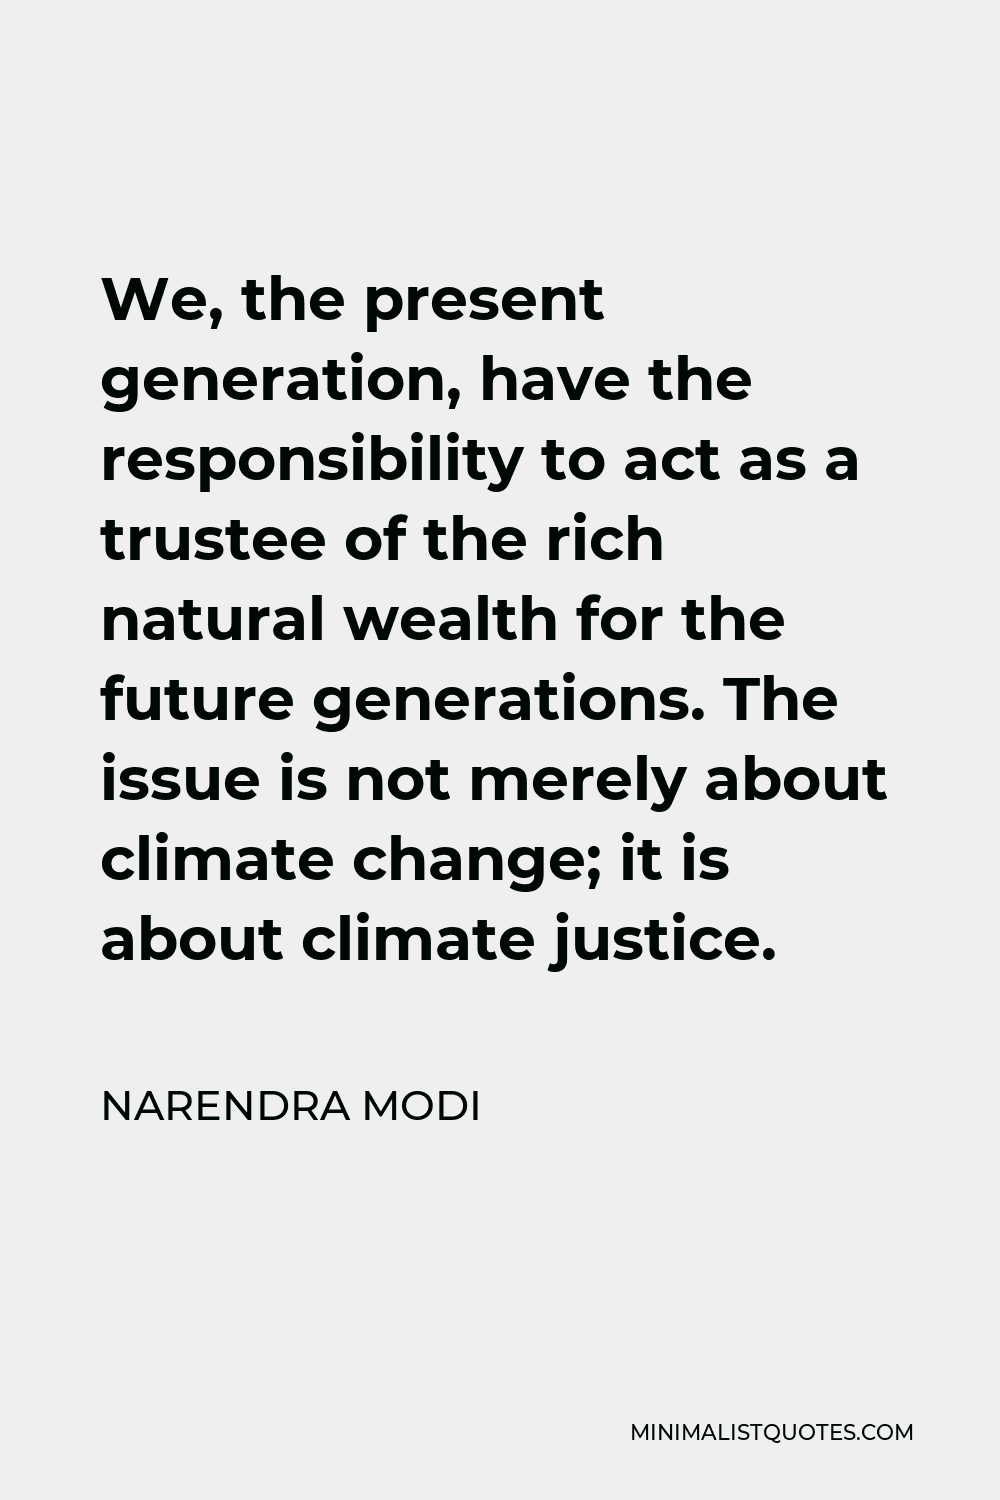 Narendra Modi Quote - We, the present generation, have the responsibility to act as a trustee of the rich natural wealth for the future generations. The issue is not merely about climate change; it is about climate justice.